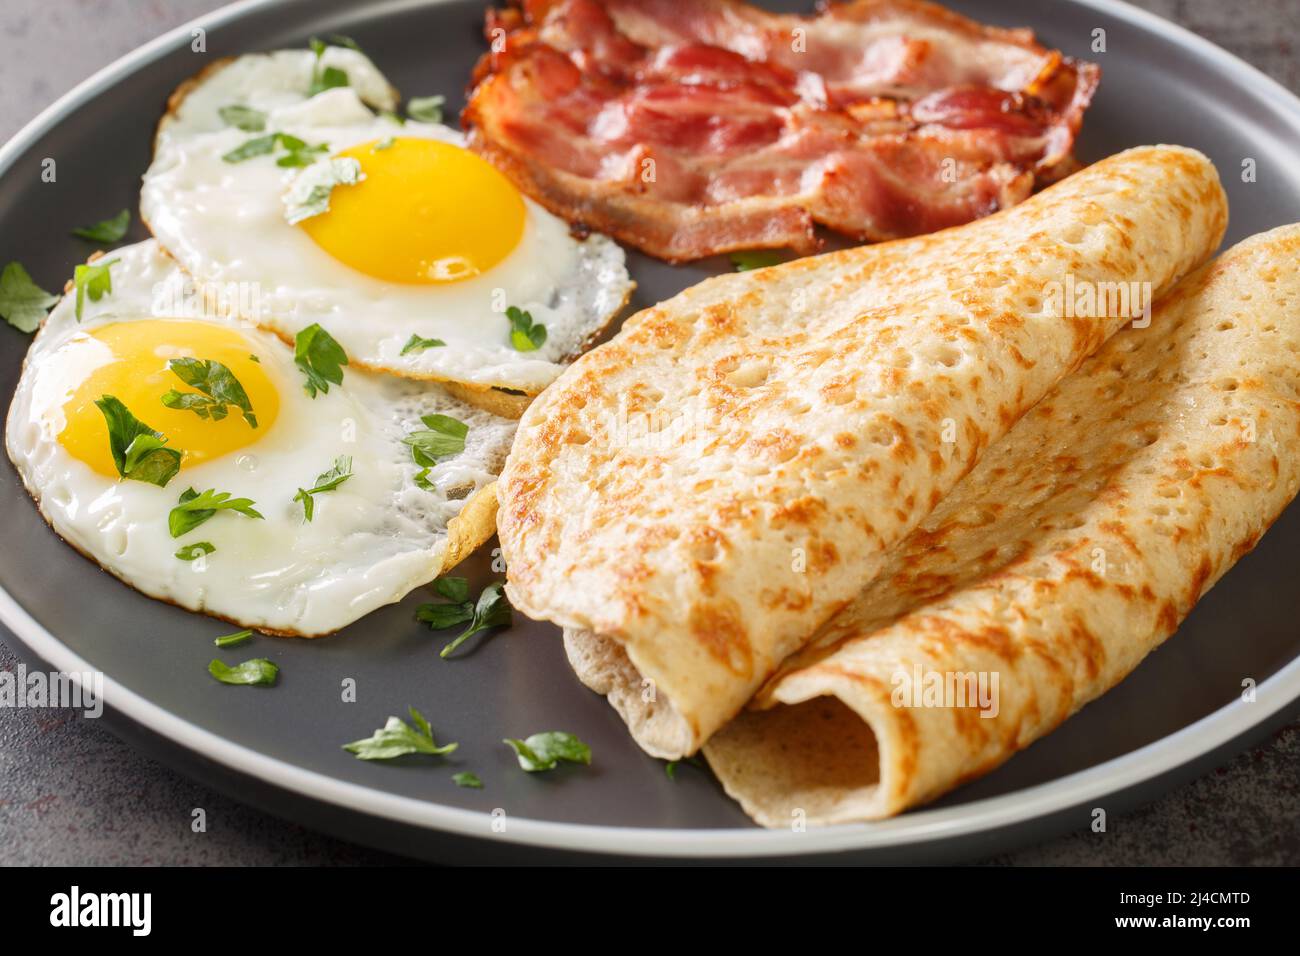 Staffordshire oatcakes with bacon and fried eggs close-up in a plate on the table. Horizontal Stock Photo